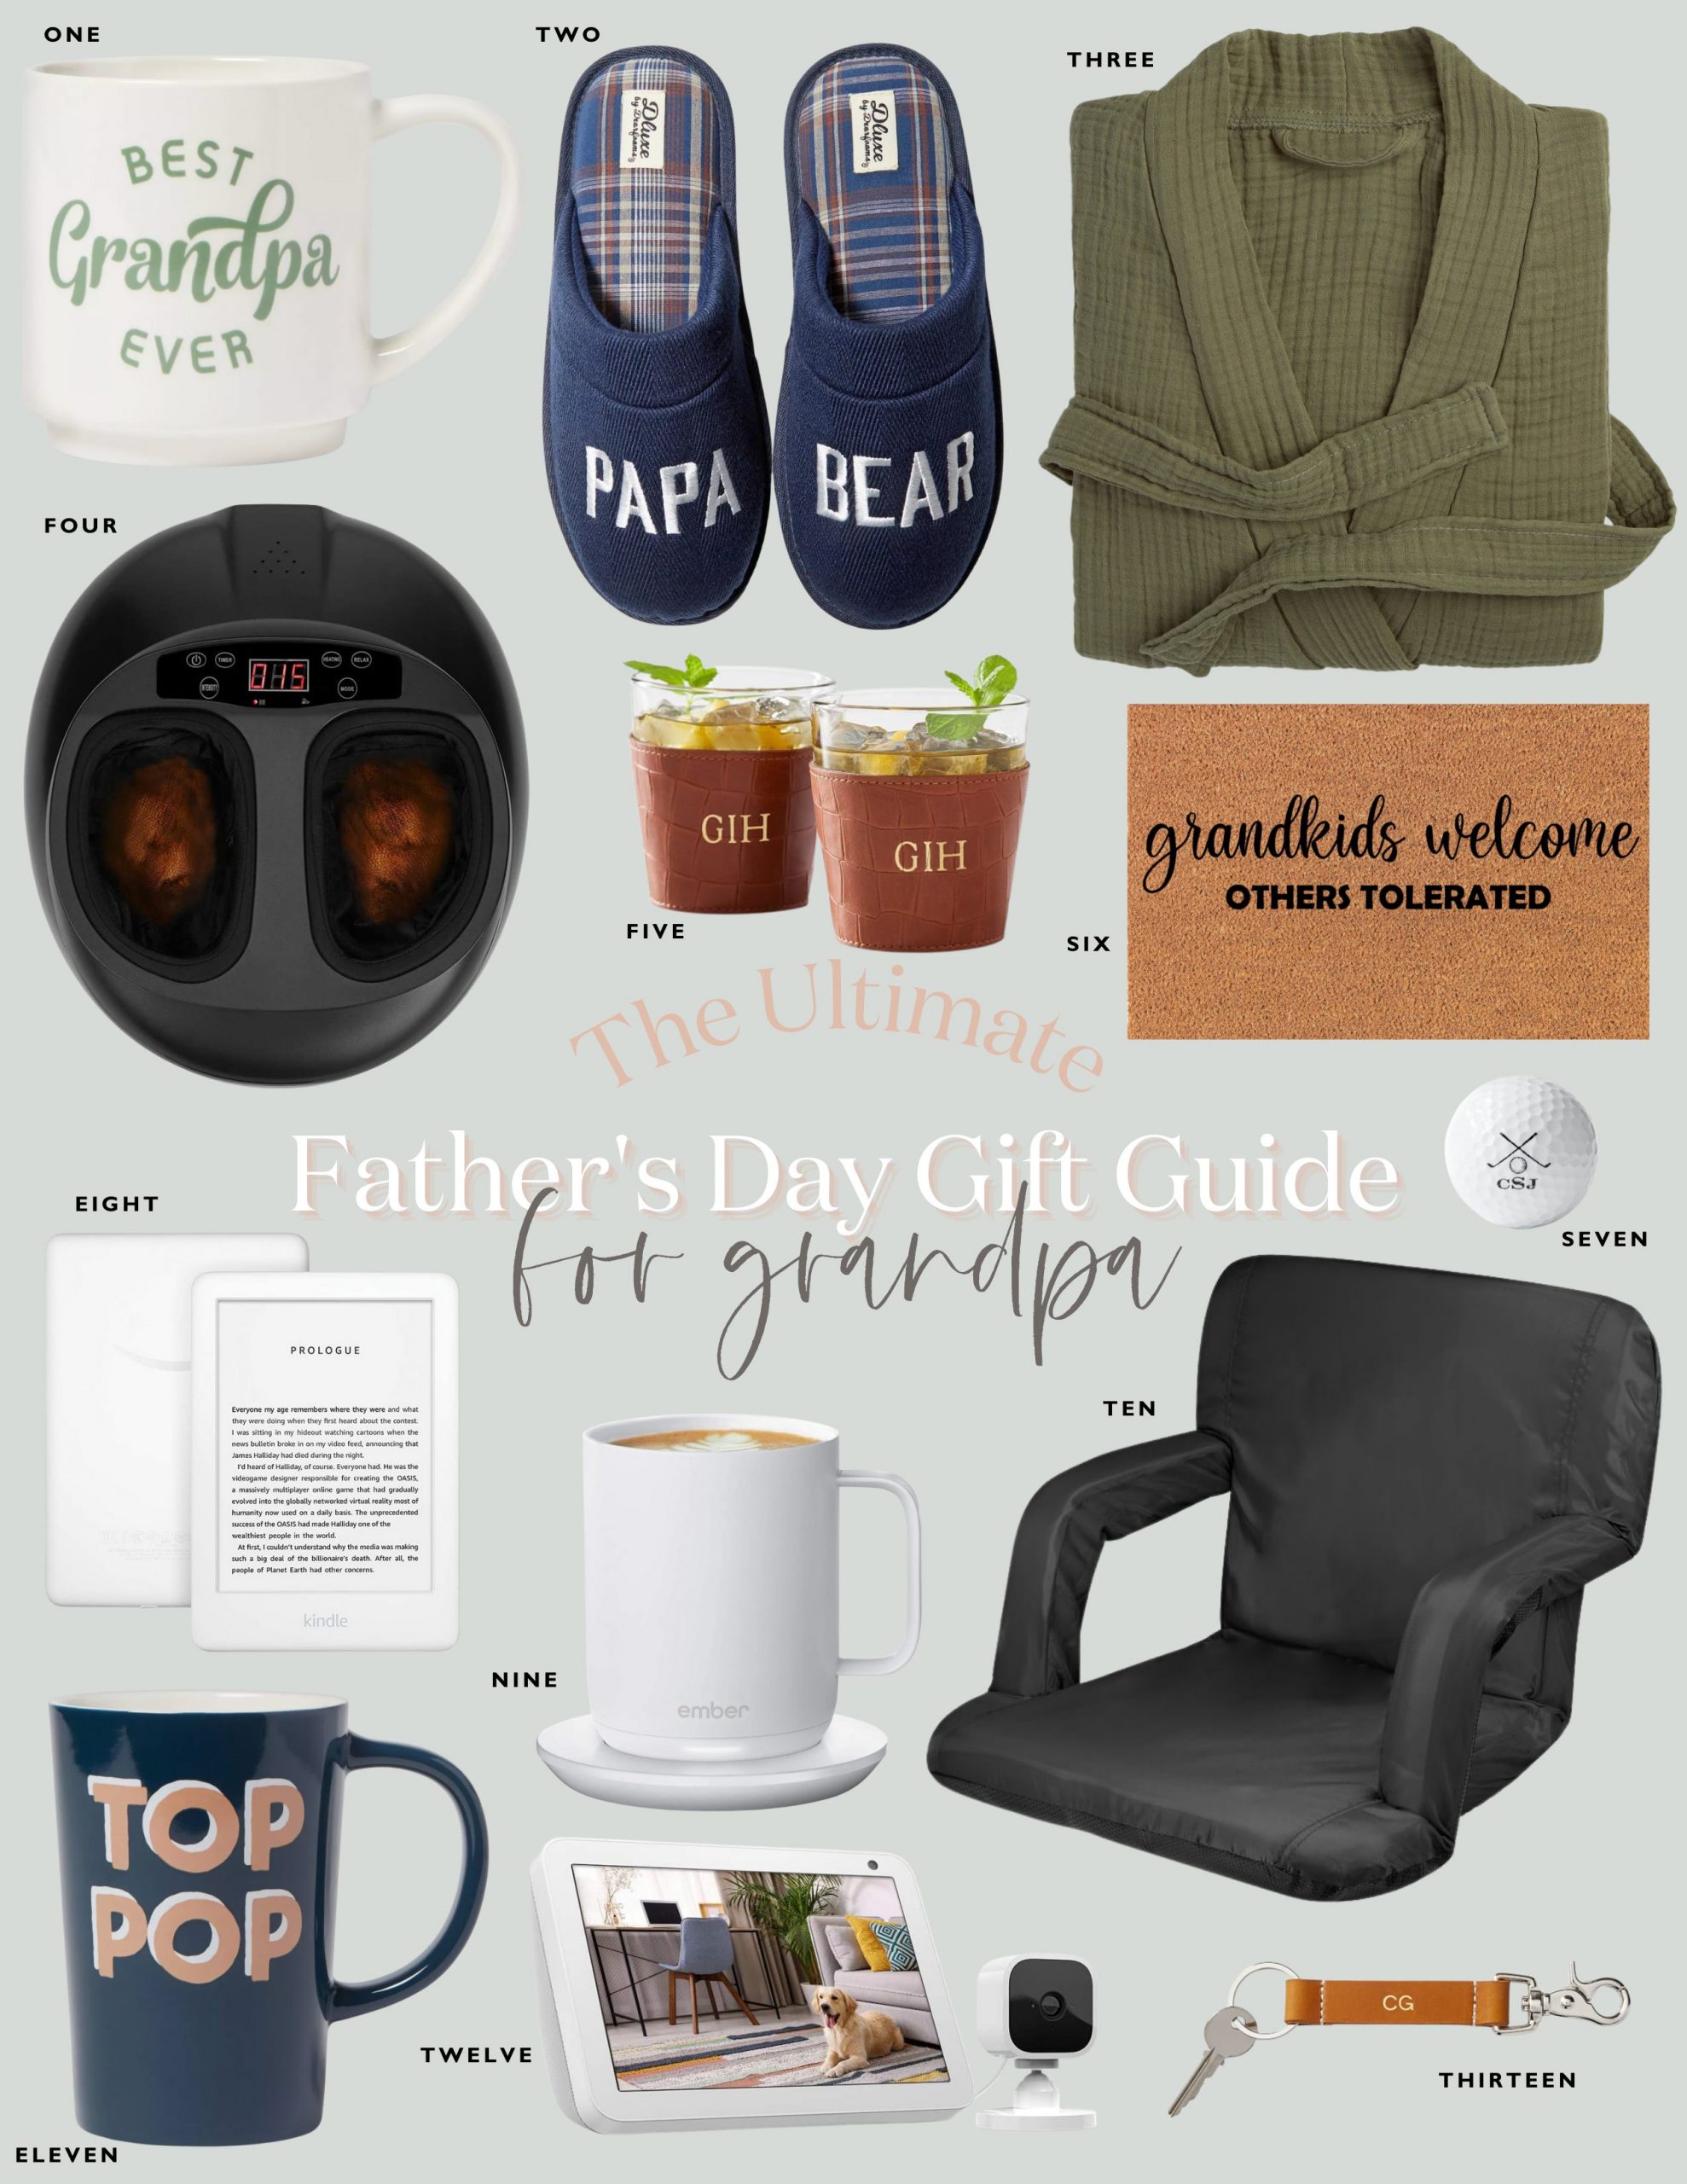 Father's Day Gift Ideas, Gift Ideas for Him, Gift Ideas for Grandpa